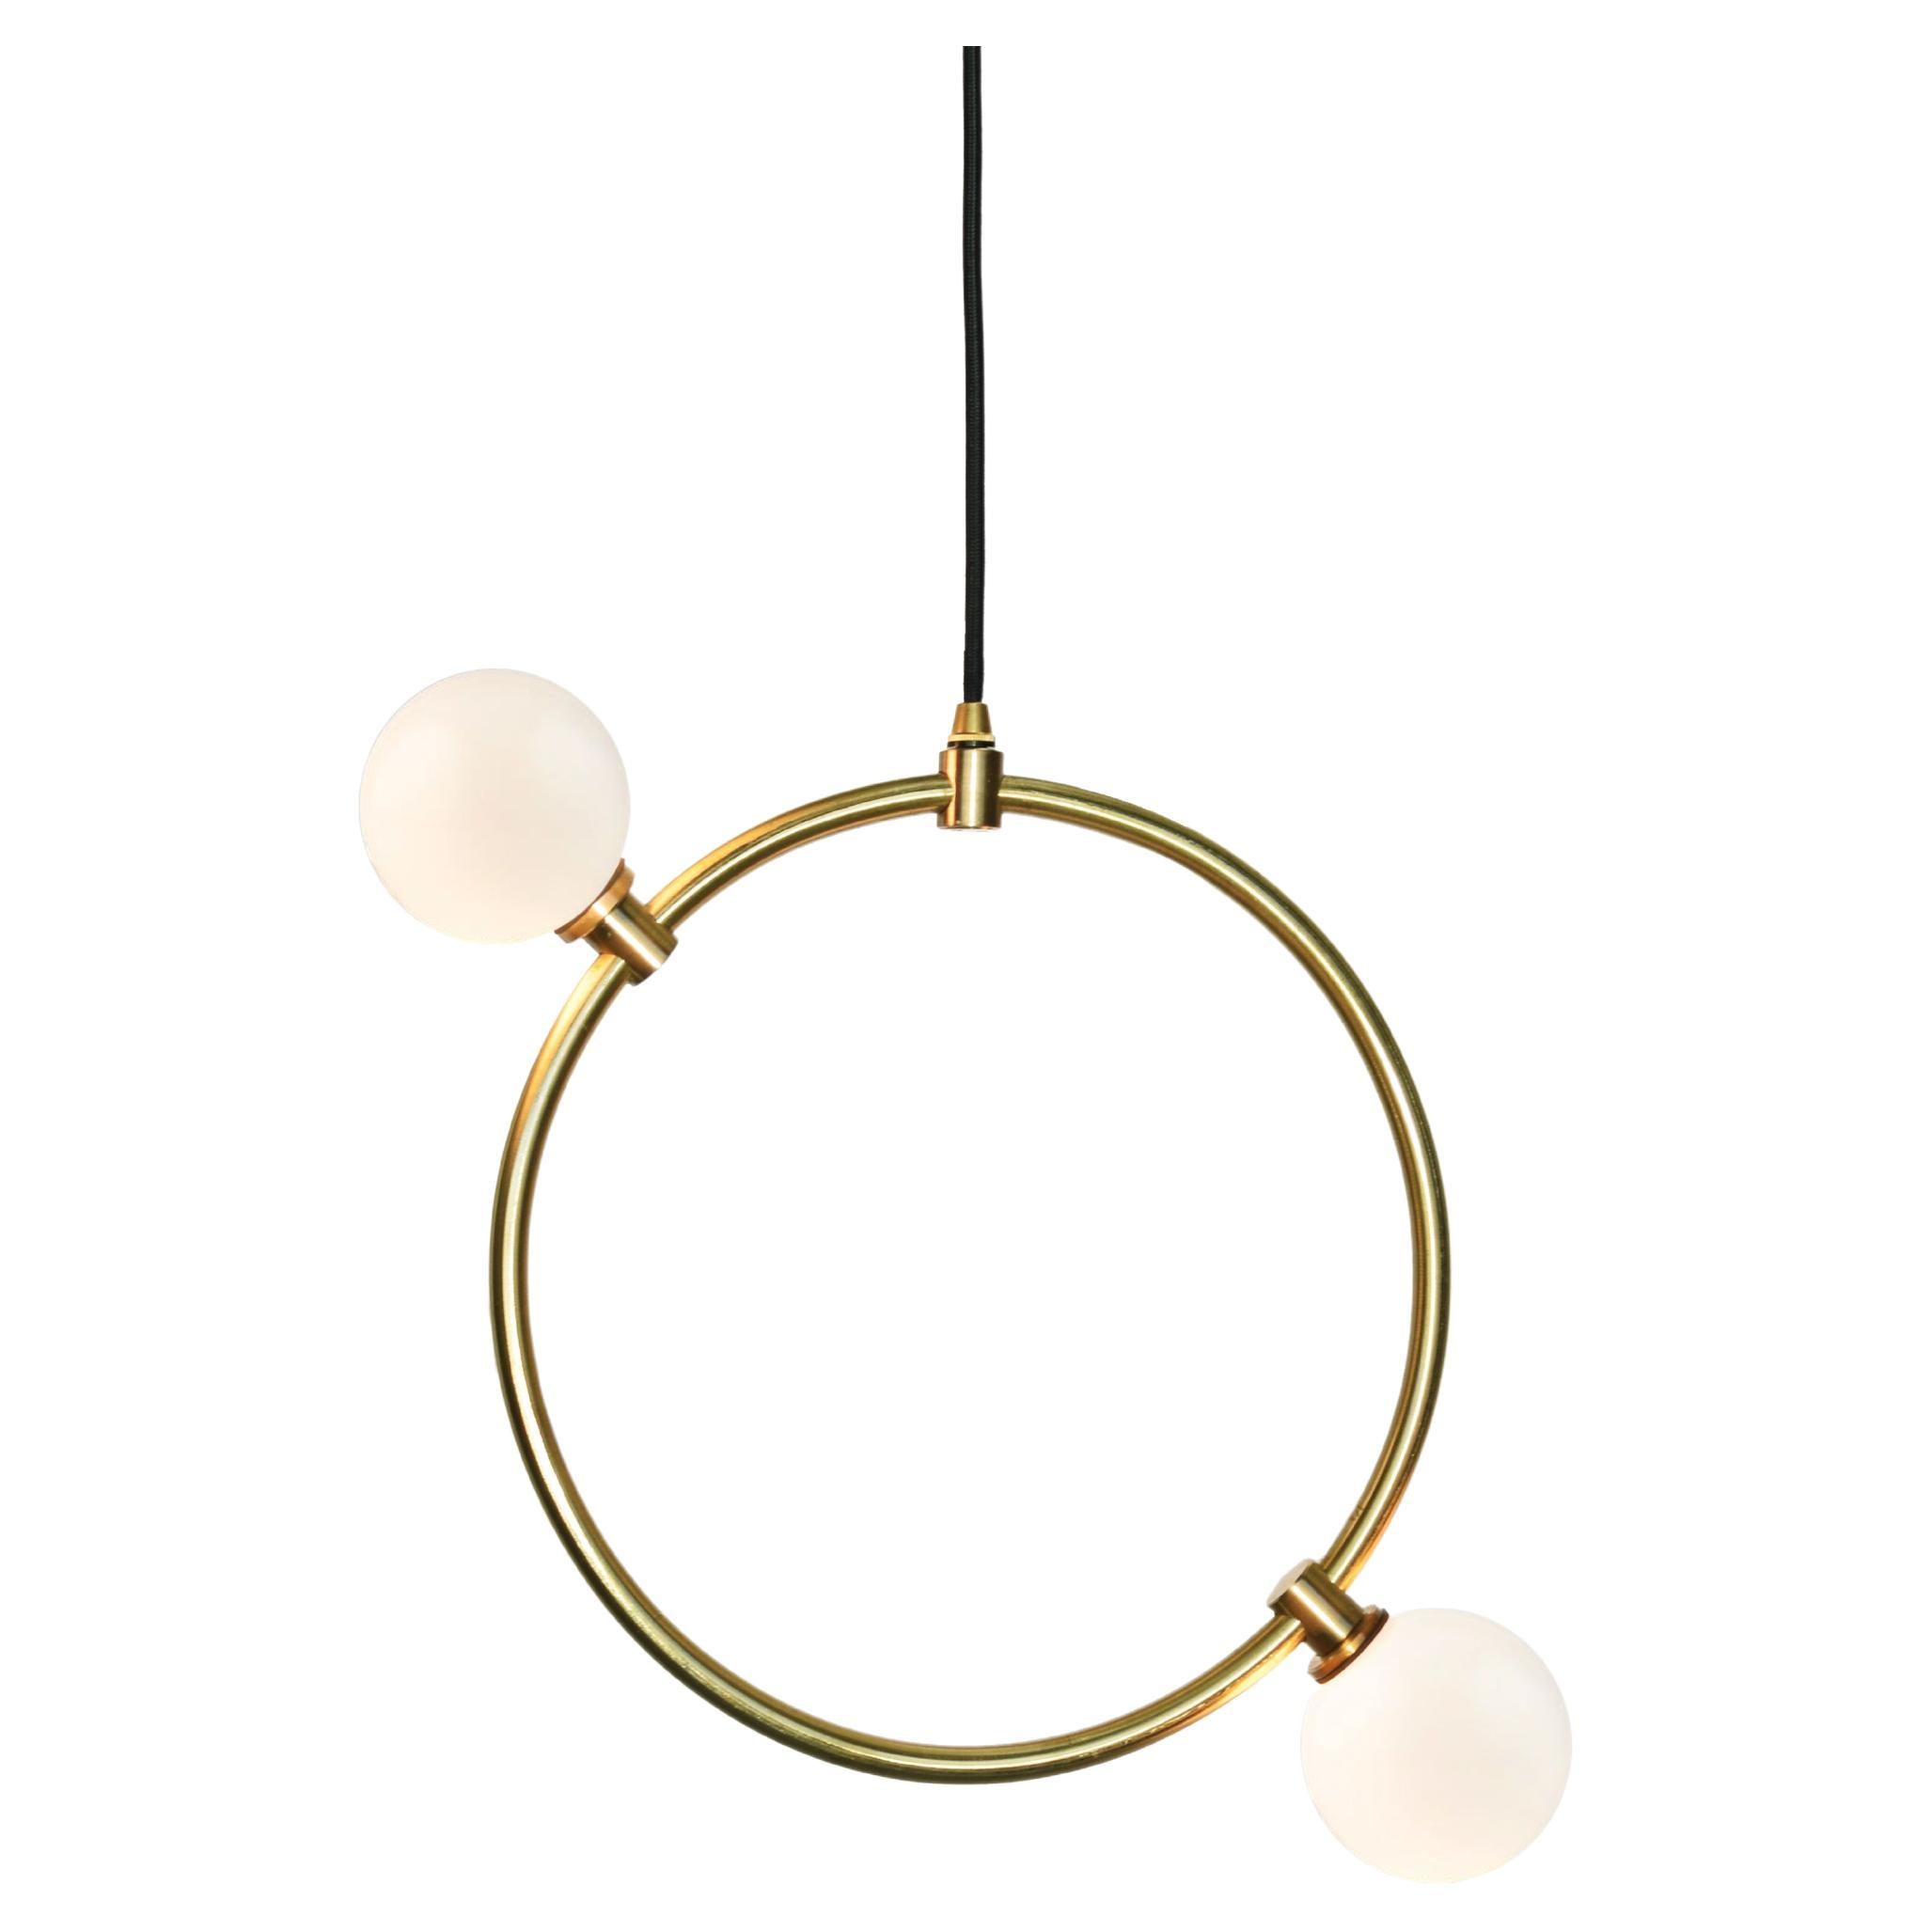 'Drops Pendant Large' by Marc Wood. Handmade Brass Ring Lamps, Opal Glass Shades